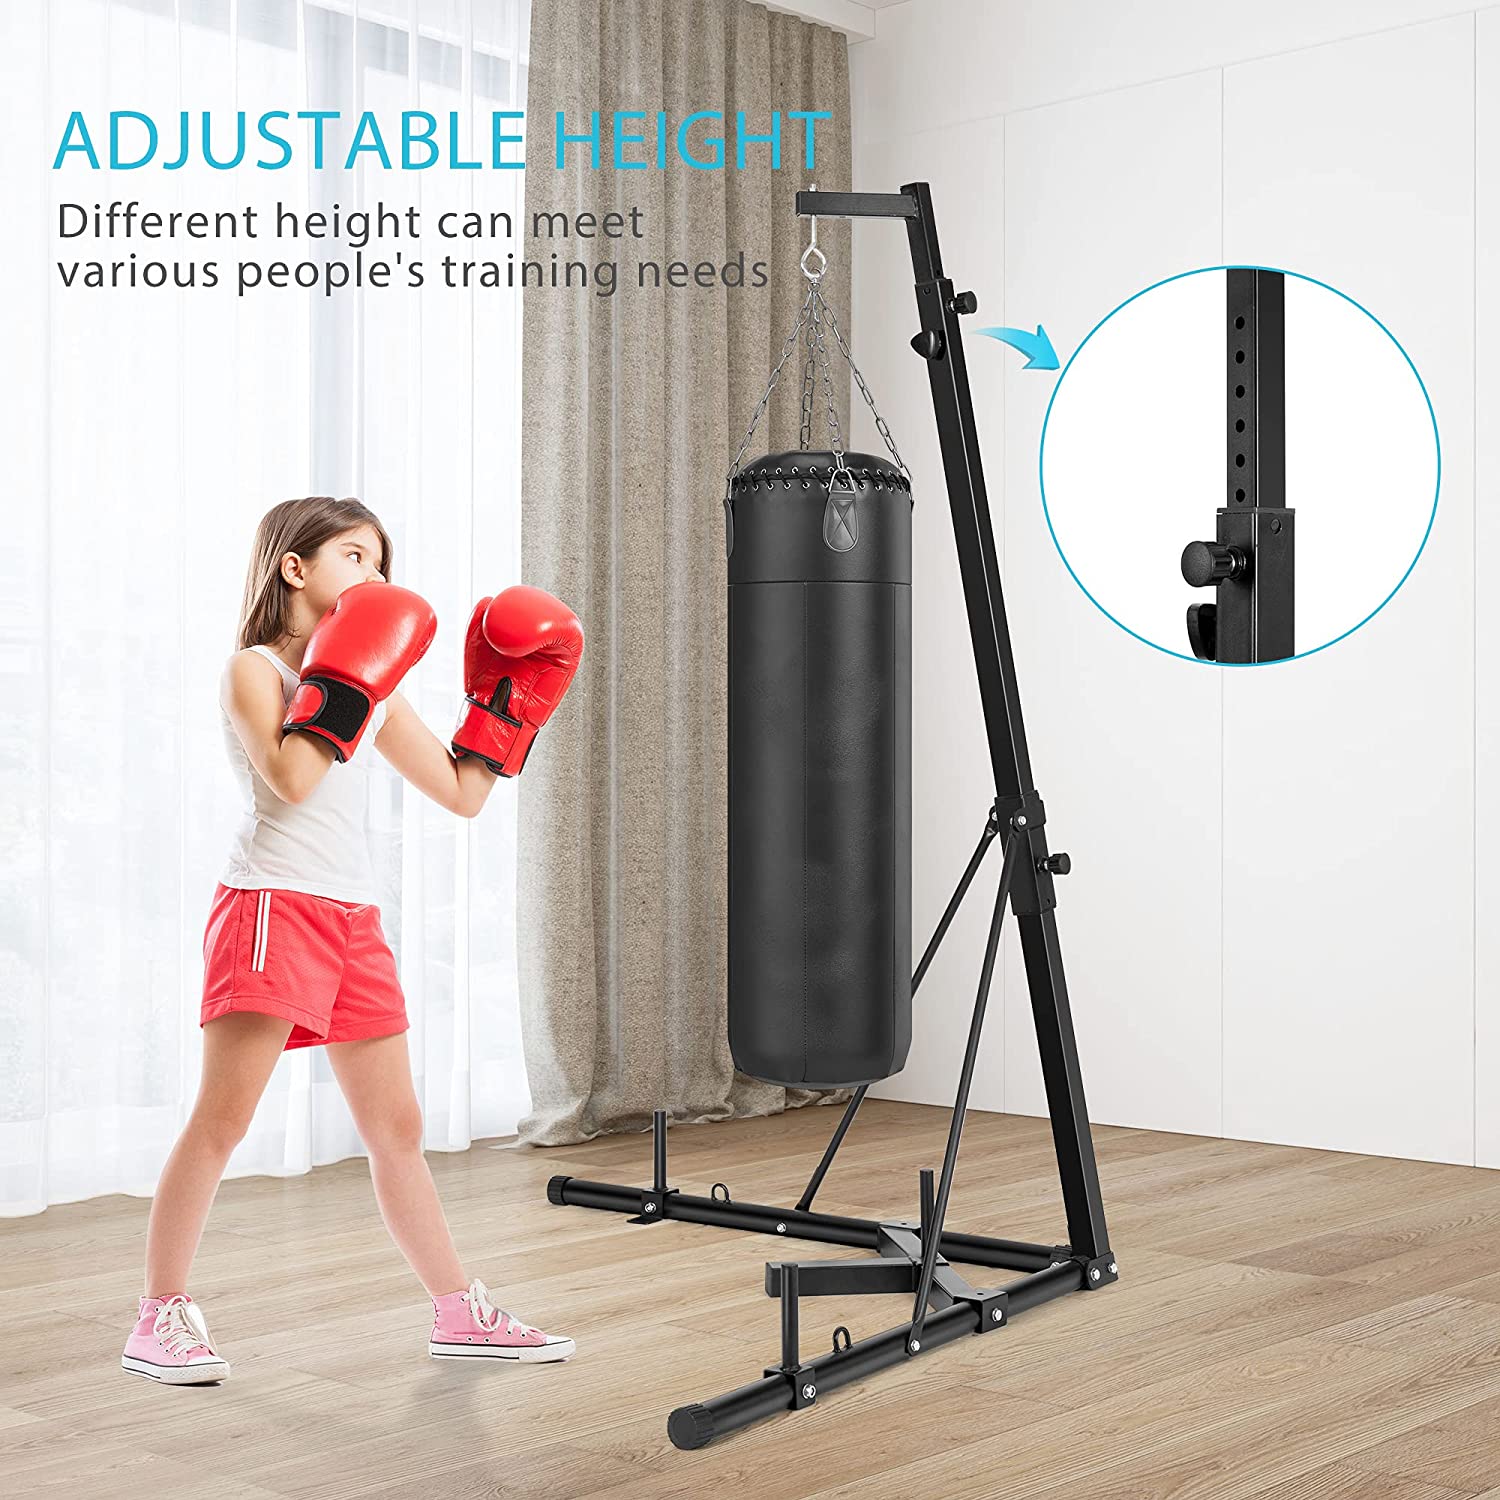 Reasons to Train on a Punching Bag - Heavy Bag Pro